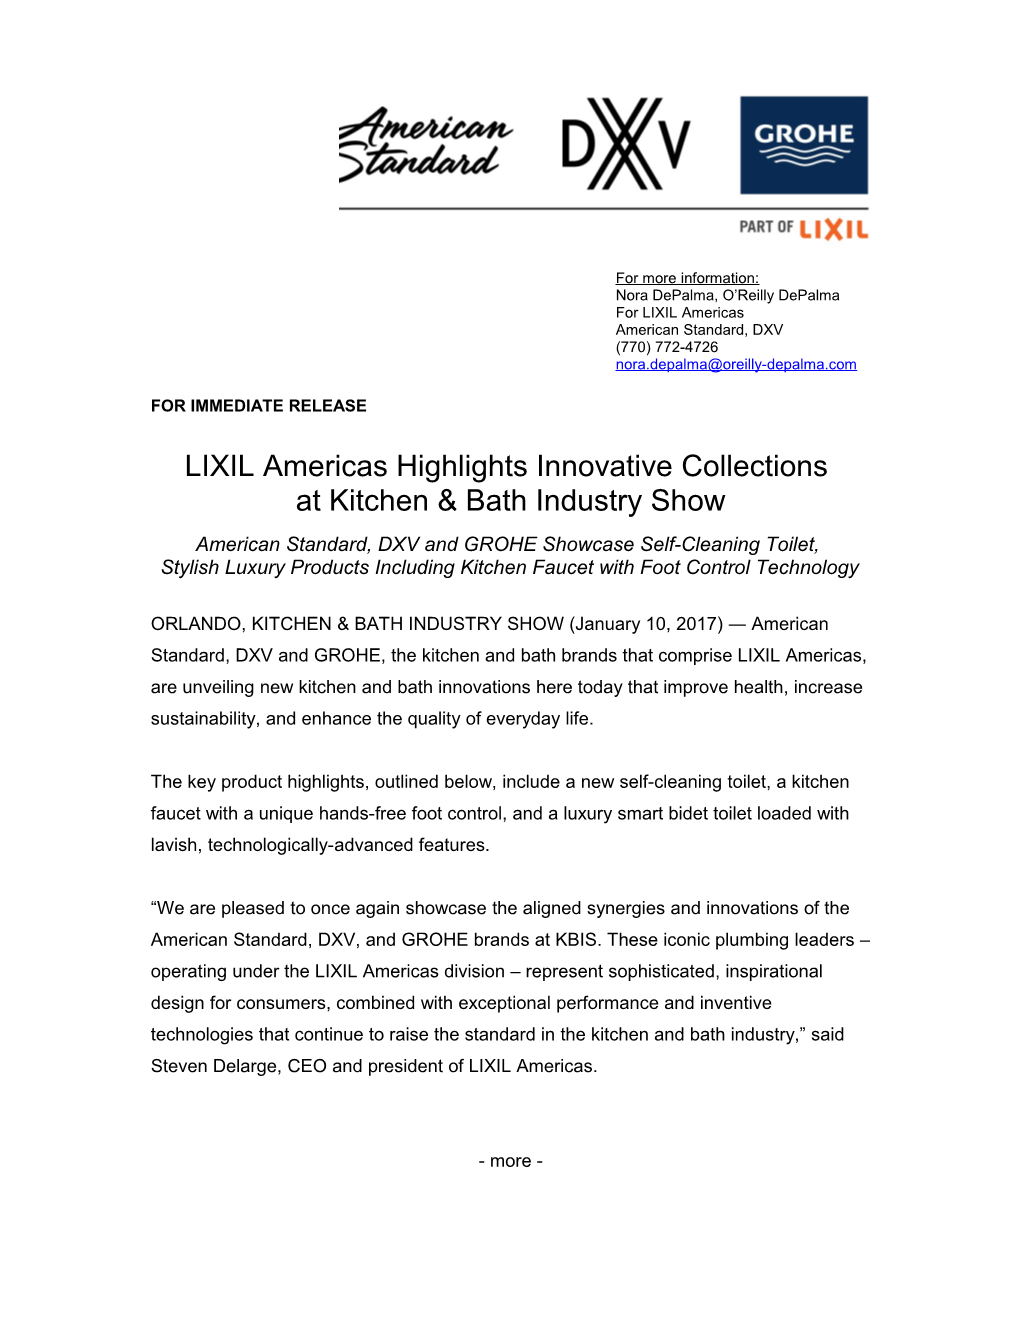 LIXIL Americas Highlights Innovative Collections at Kitchen Bath Industry Show 2-2-2